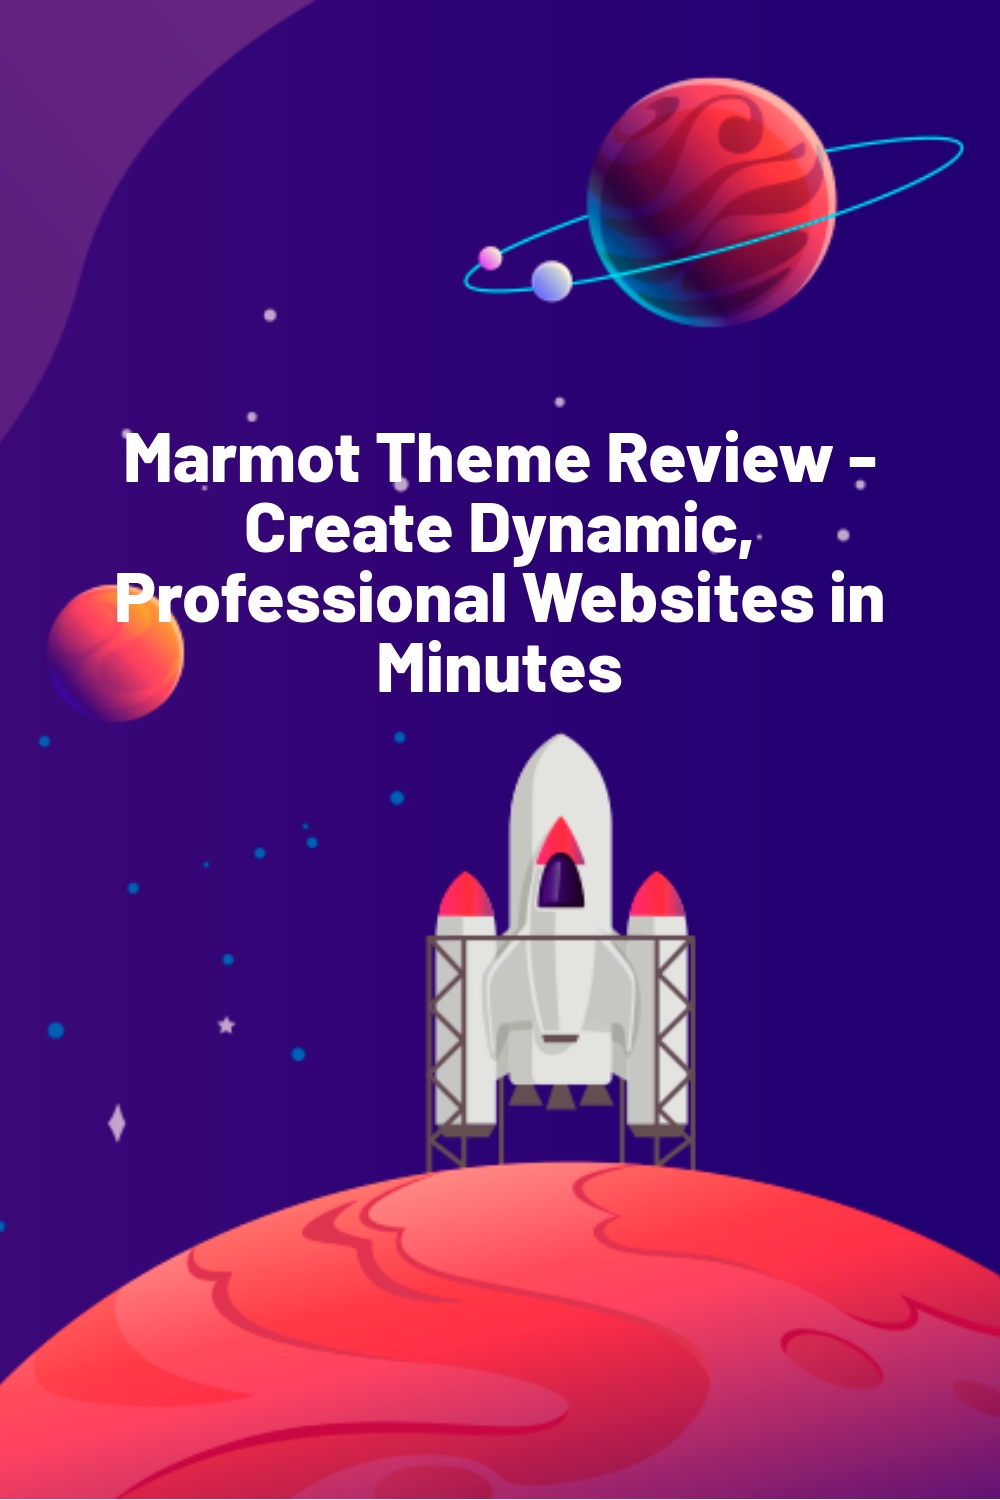 Marmot Theme Review – Create Dynamic, Professional Websites in Minutes